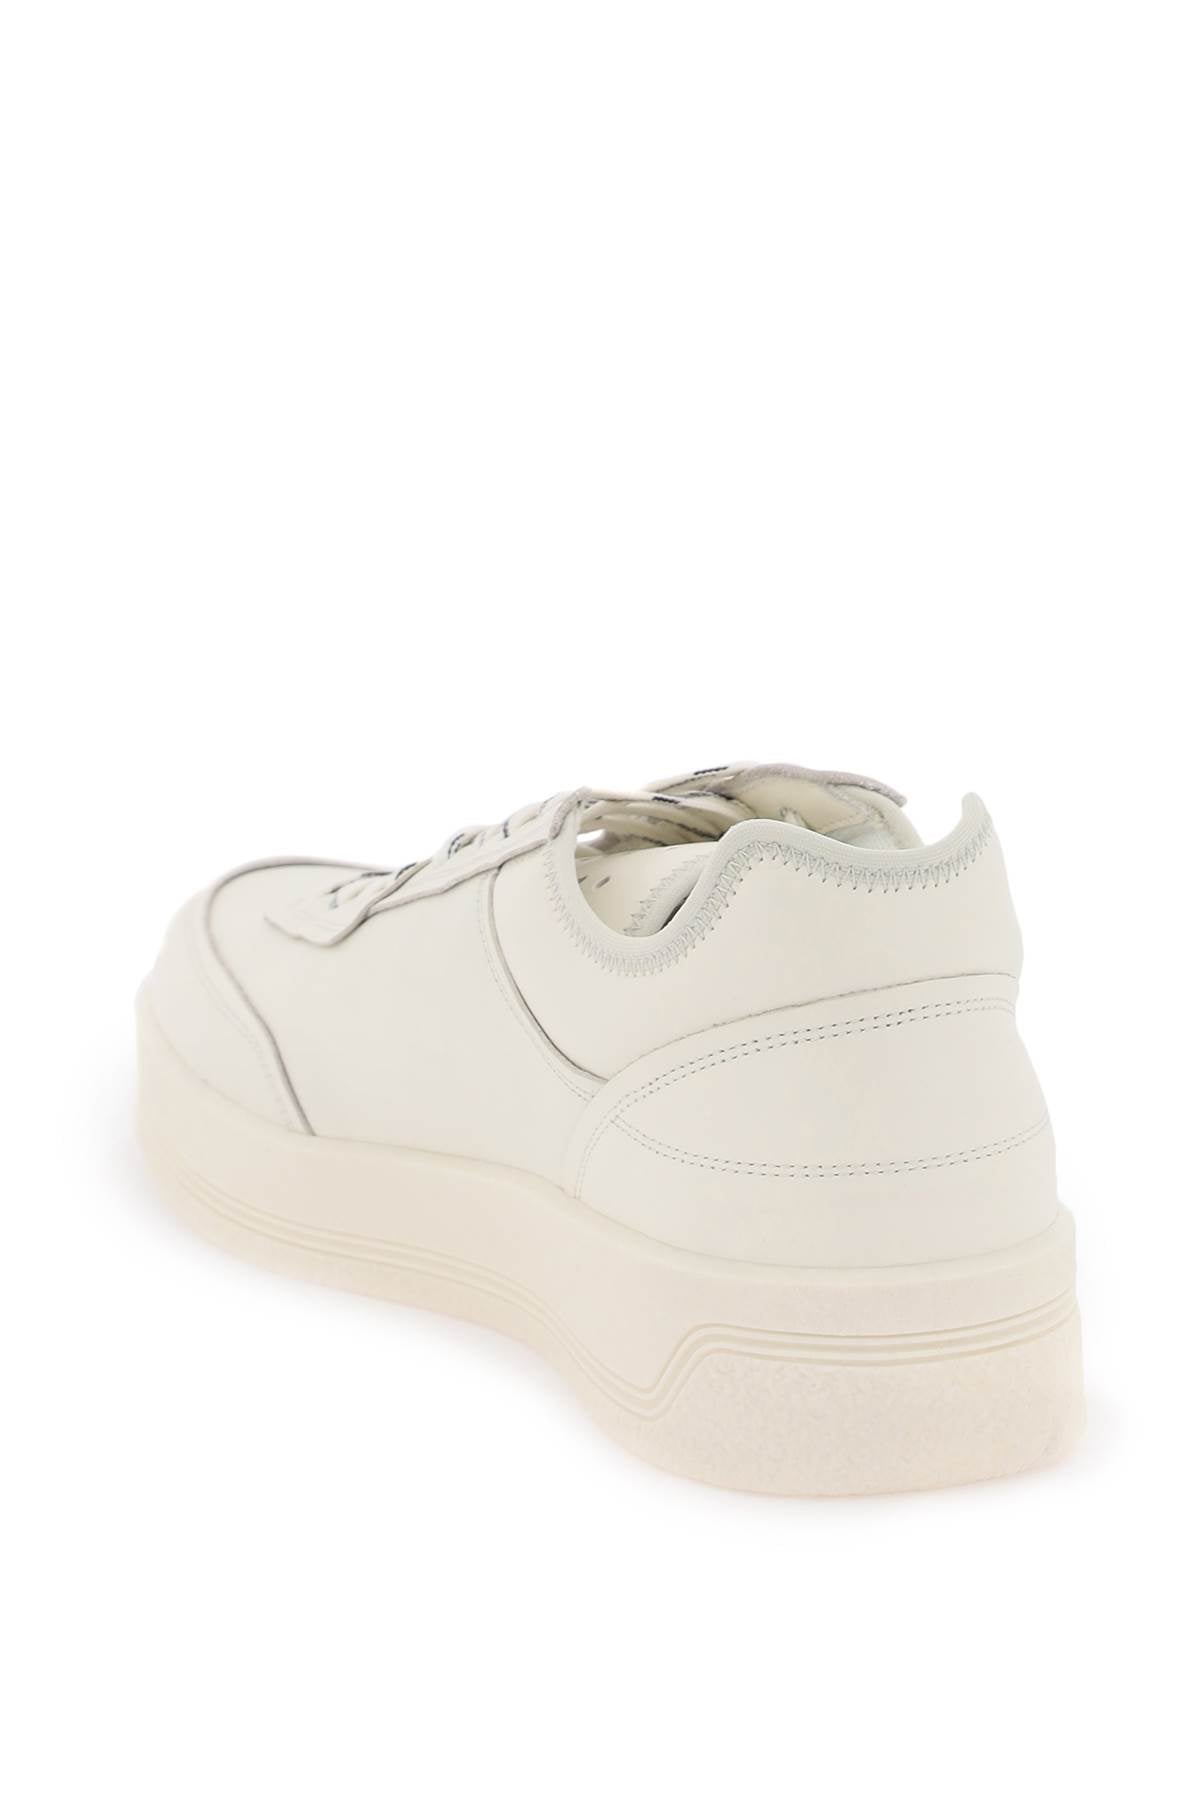 Oamc 'cosmos cupsole' sneakers-2